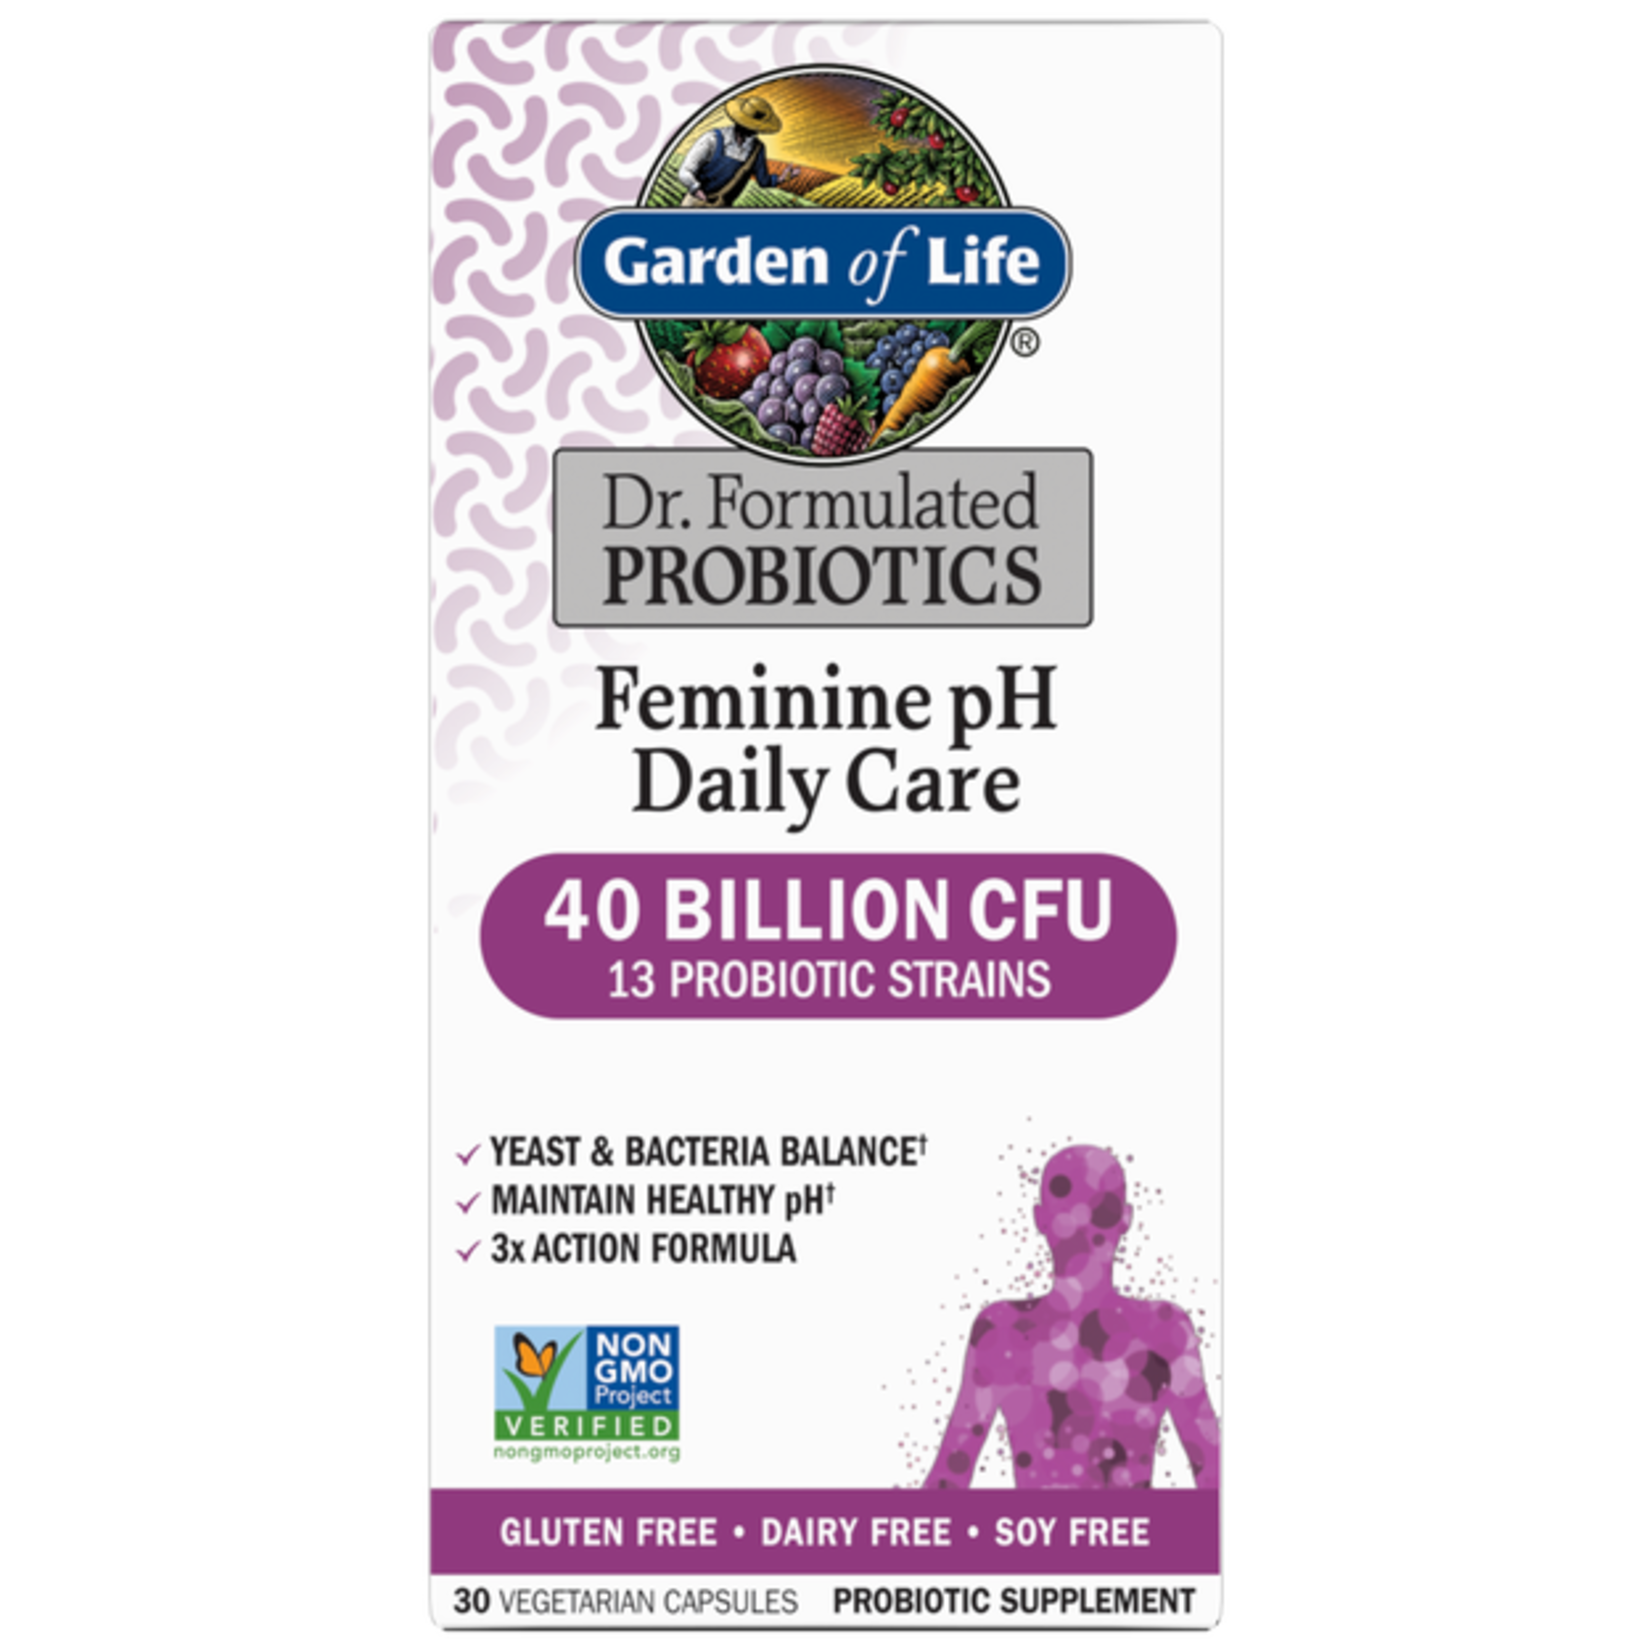 Garden of Life Garden of Life - Dr. Formulated Once Daily Women's Probiotics - 30 Veg Capsules